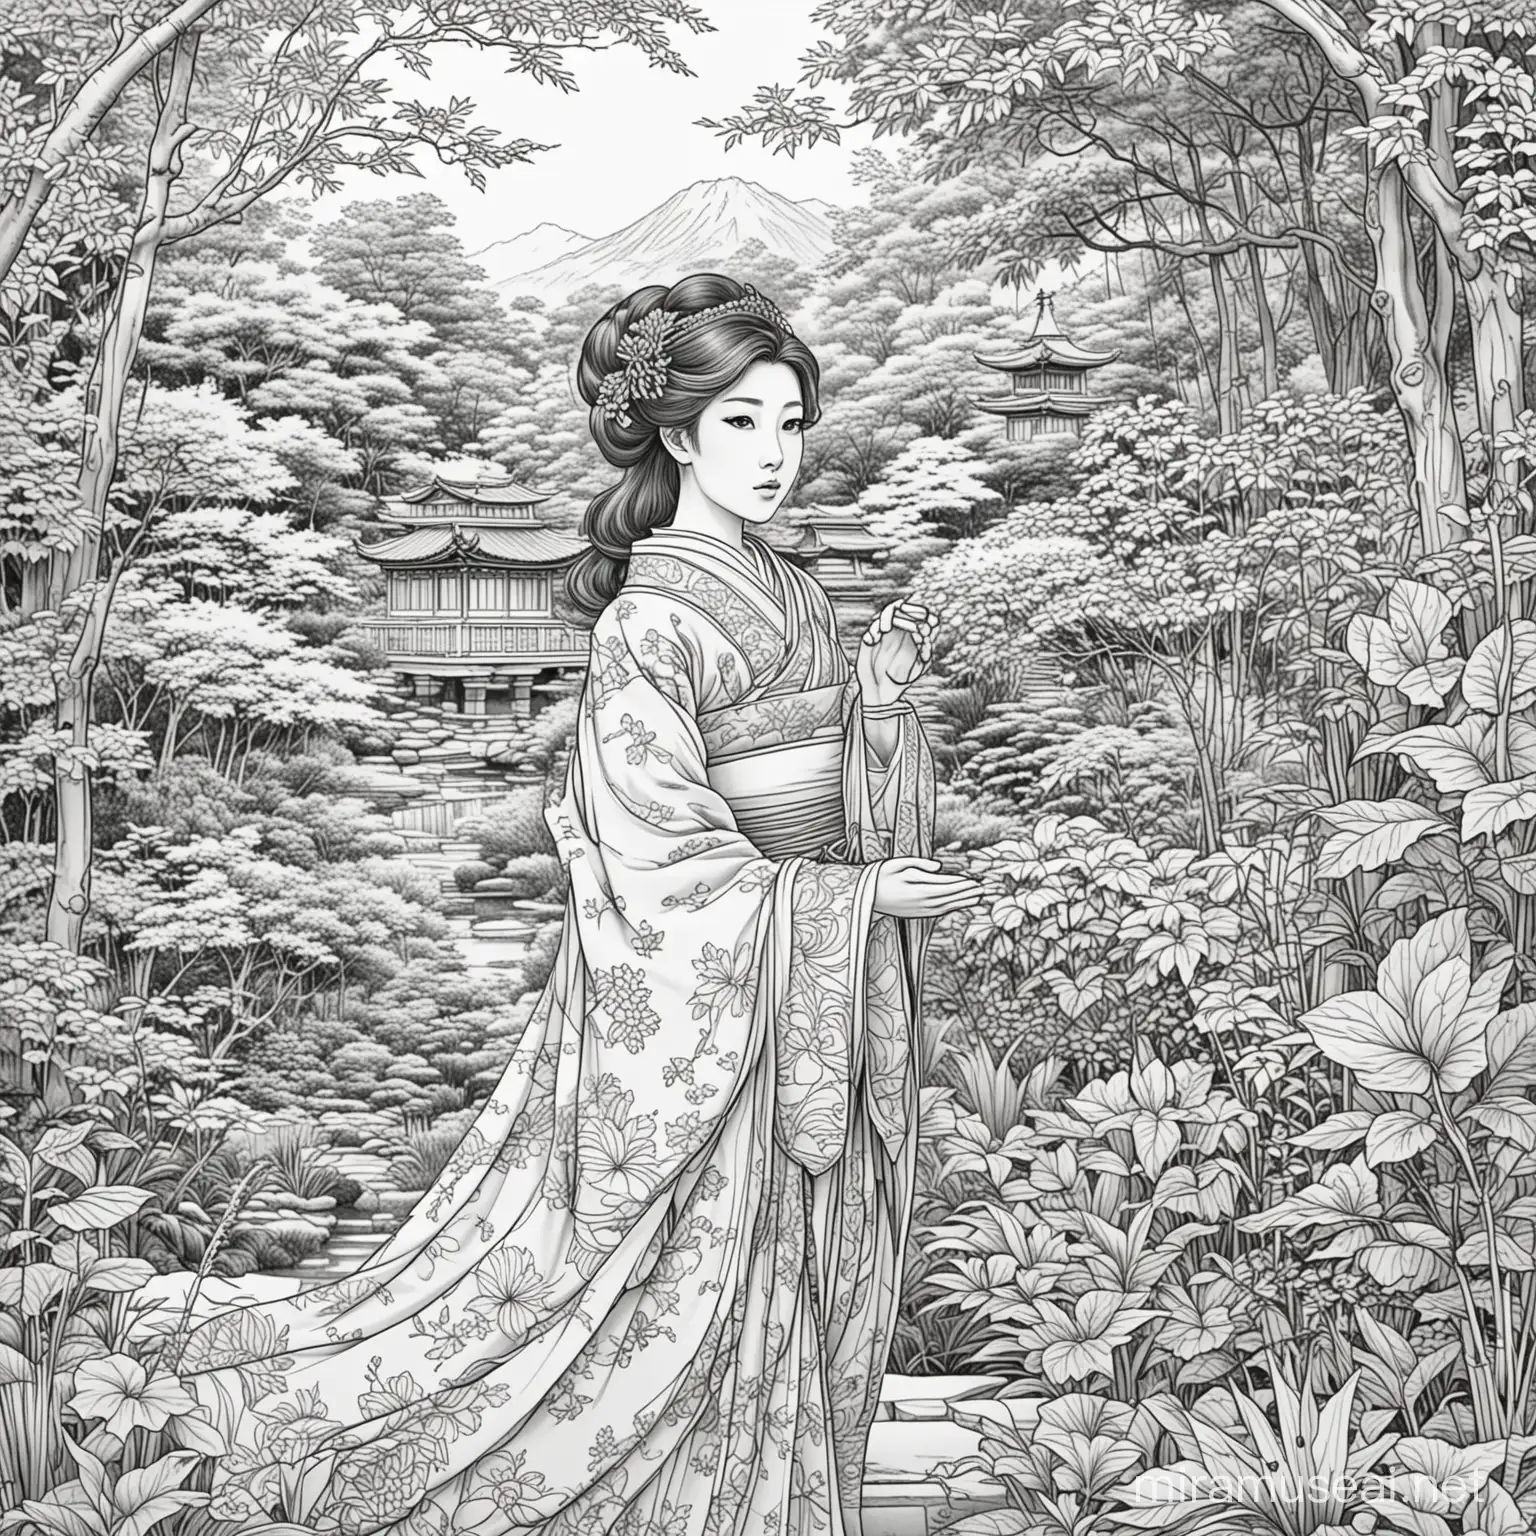 japanese princess sadly looking out over a fantastic garden coloring book page
